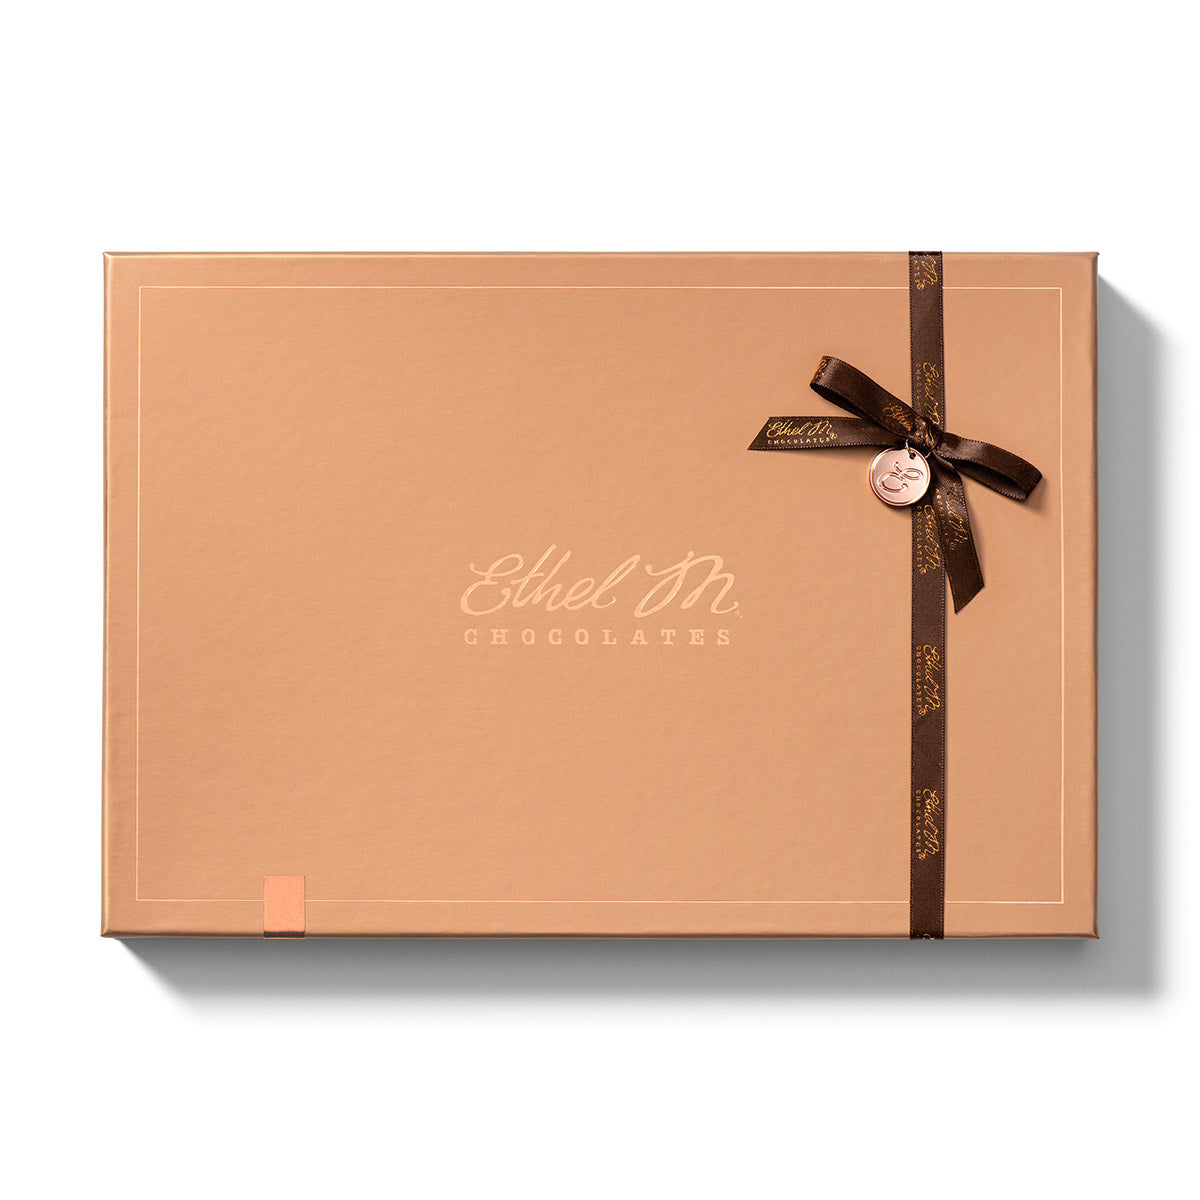 Ethel M Chocolates 24-piece Copper Box with Copper Ribbon Custom Collection - Hero Image